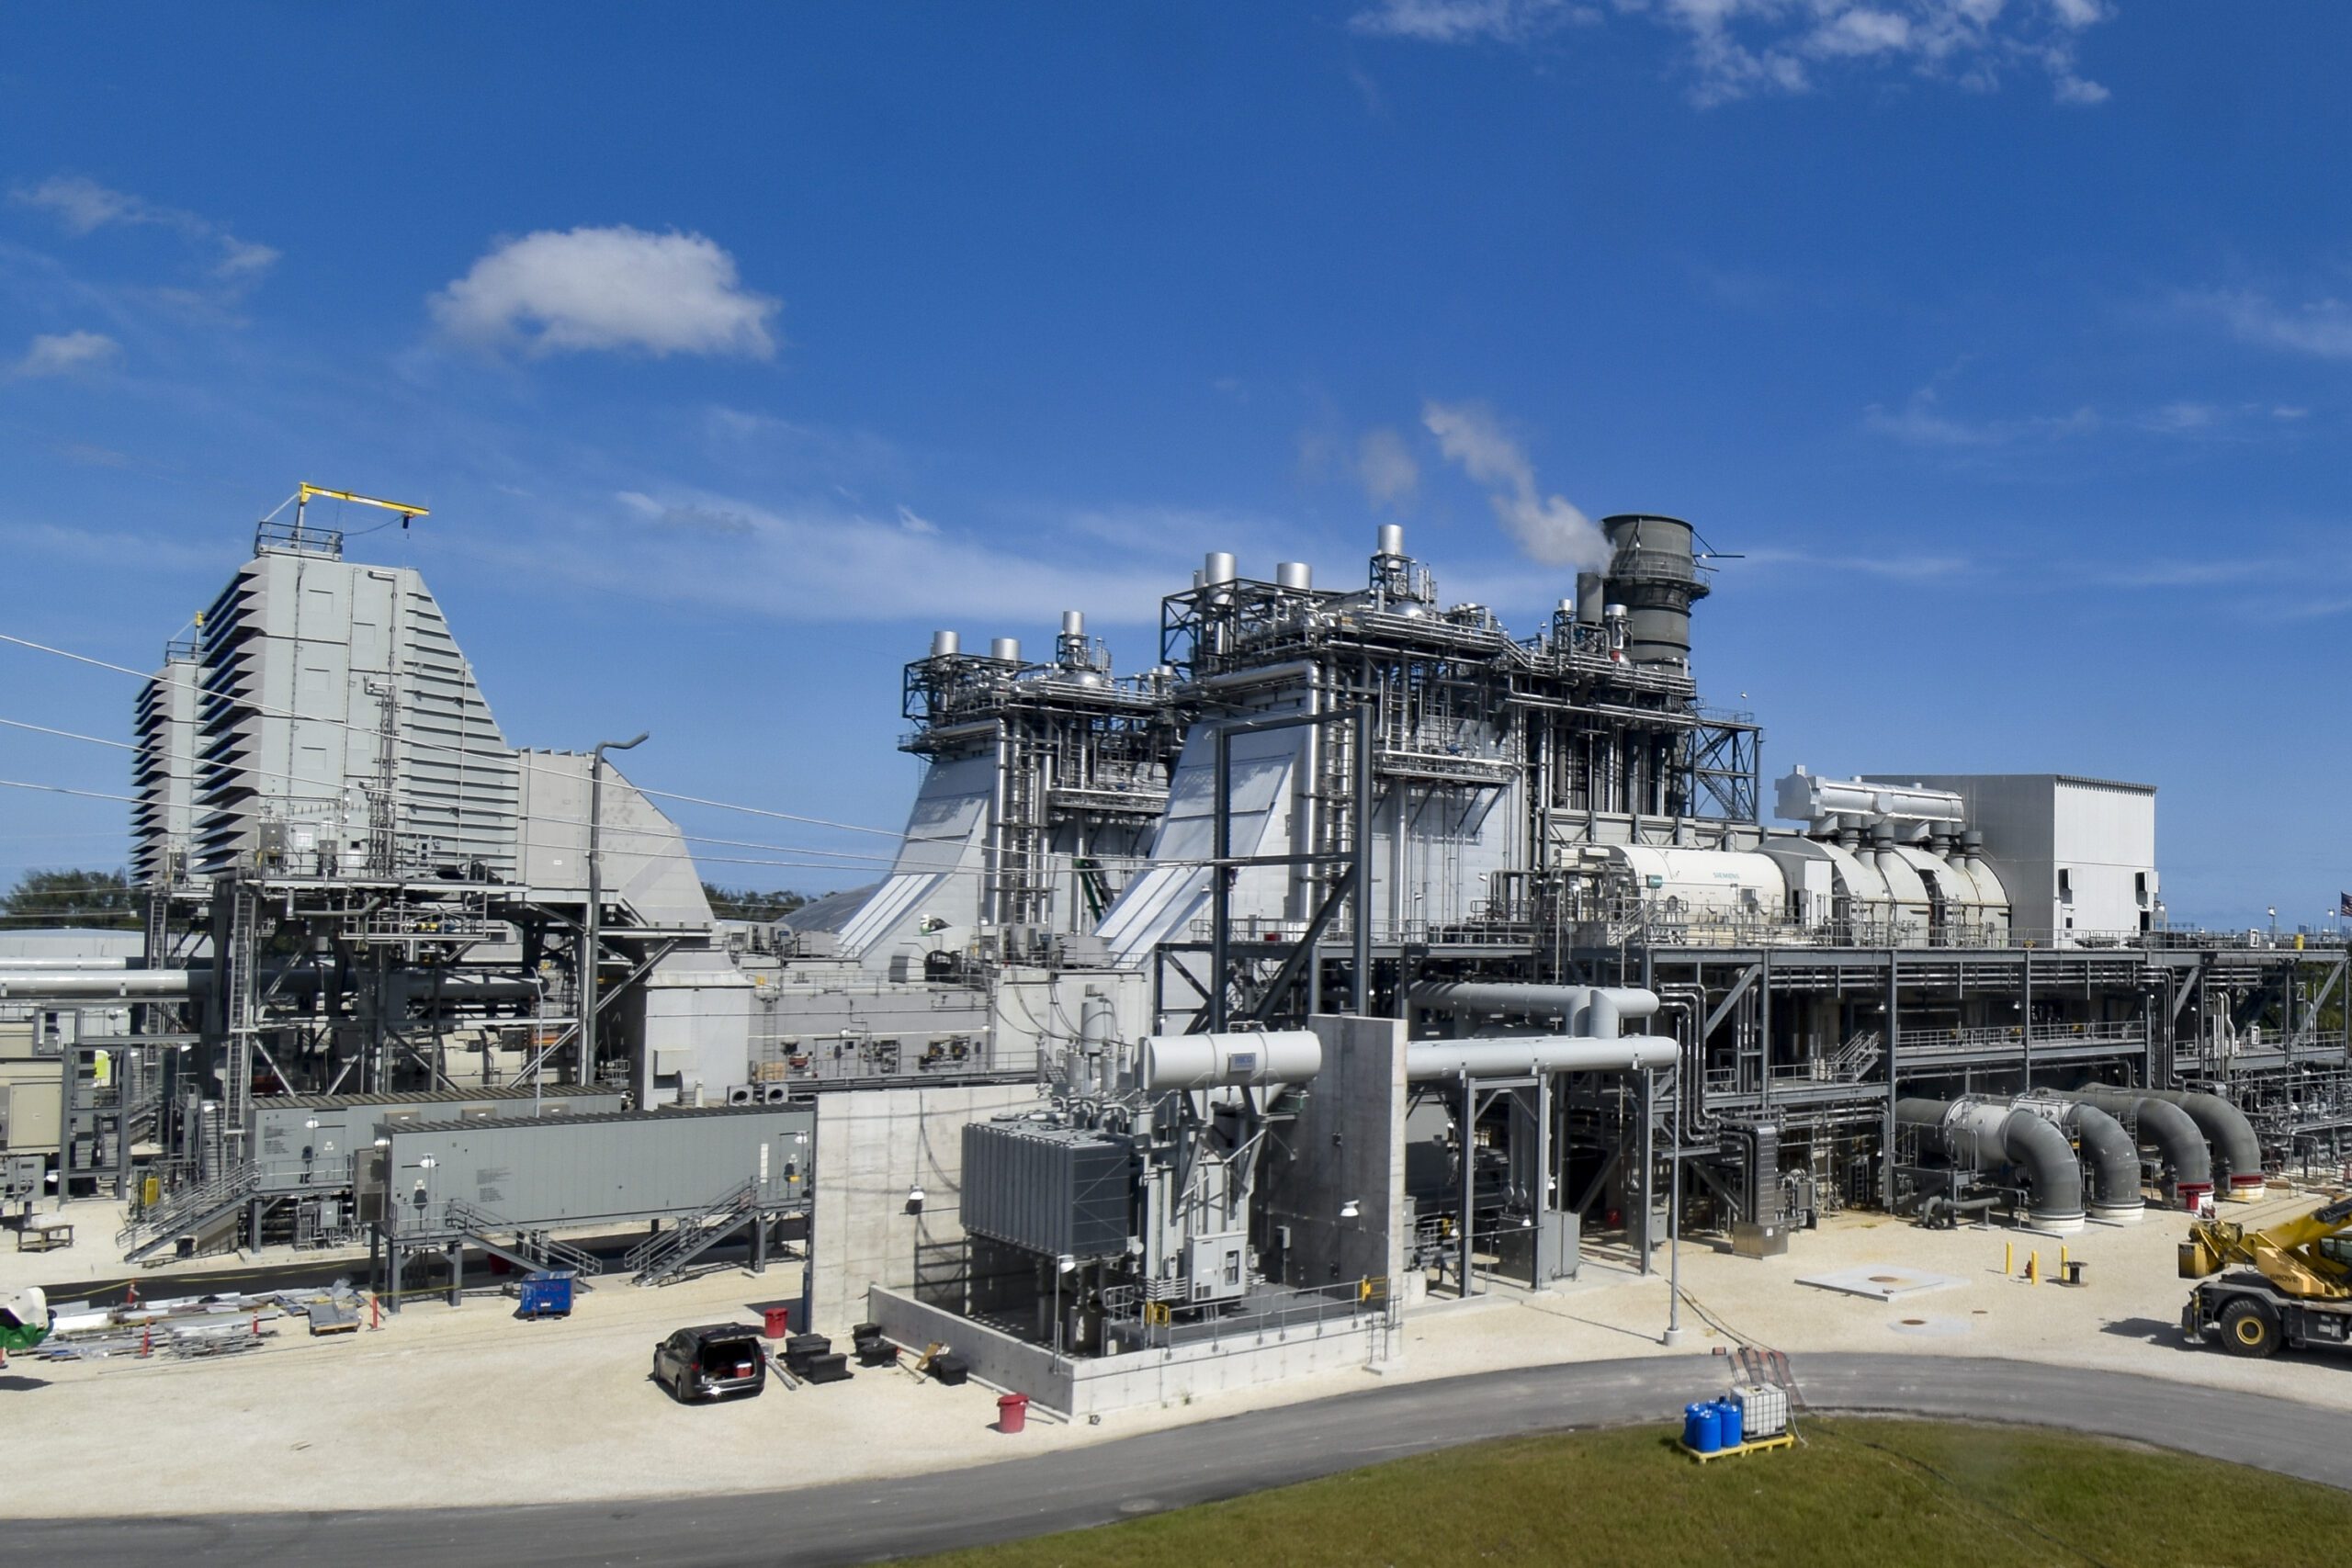 GE Debuts First 7HA.03 Gas Turbines at 1.3-GW Plant in Florida